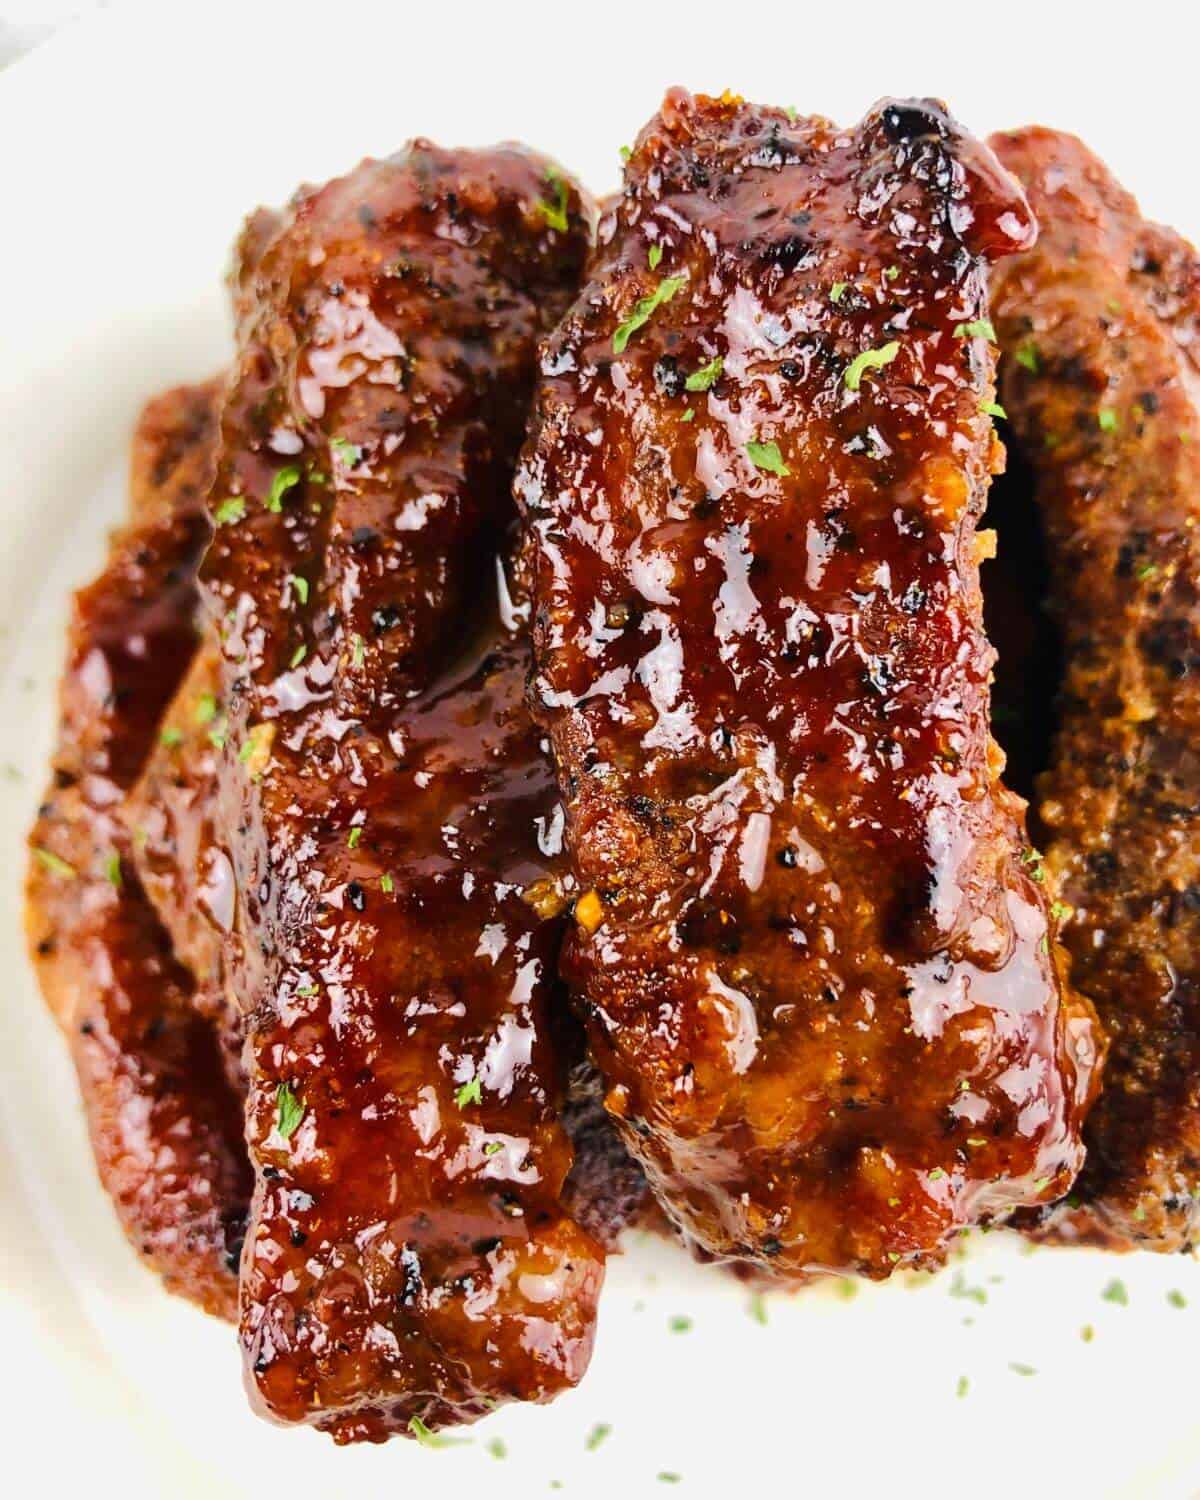 Cooked and sauced pork ribs on a white plate.